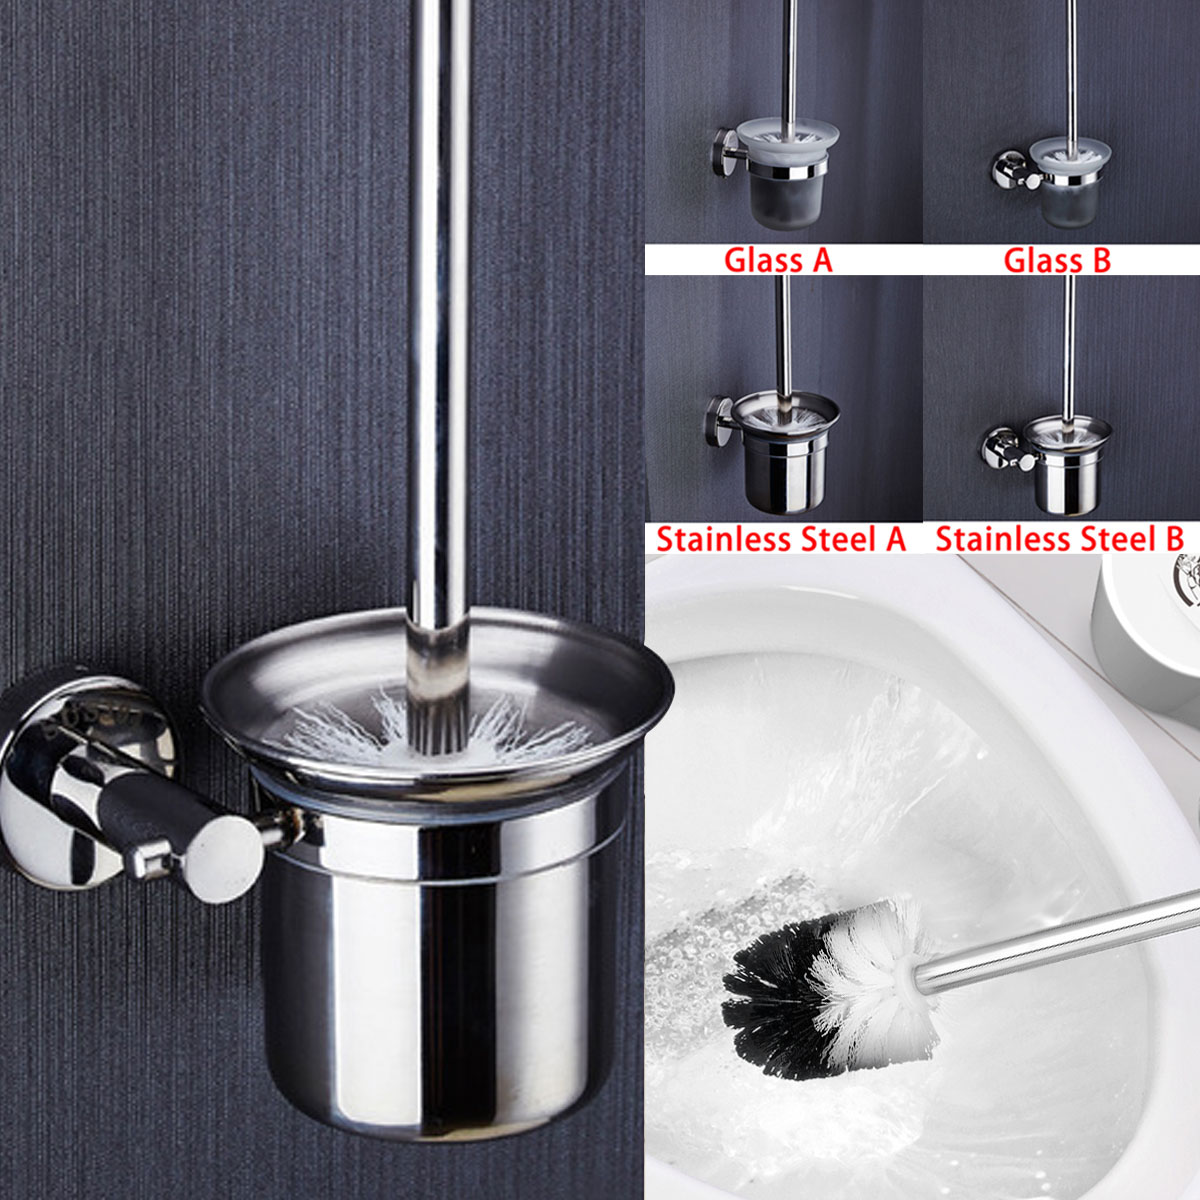 Toilet-Cleaning-Brushes-Dead-Corner-Soft-Hair-Wall-Mounted-Household-Bathroom-Cleaning-1602218-4